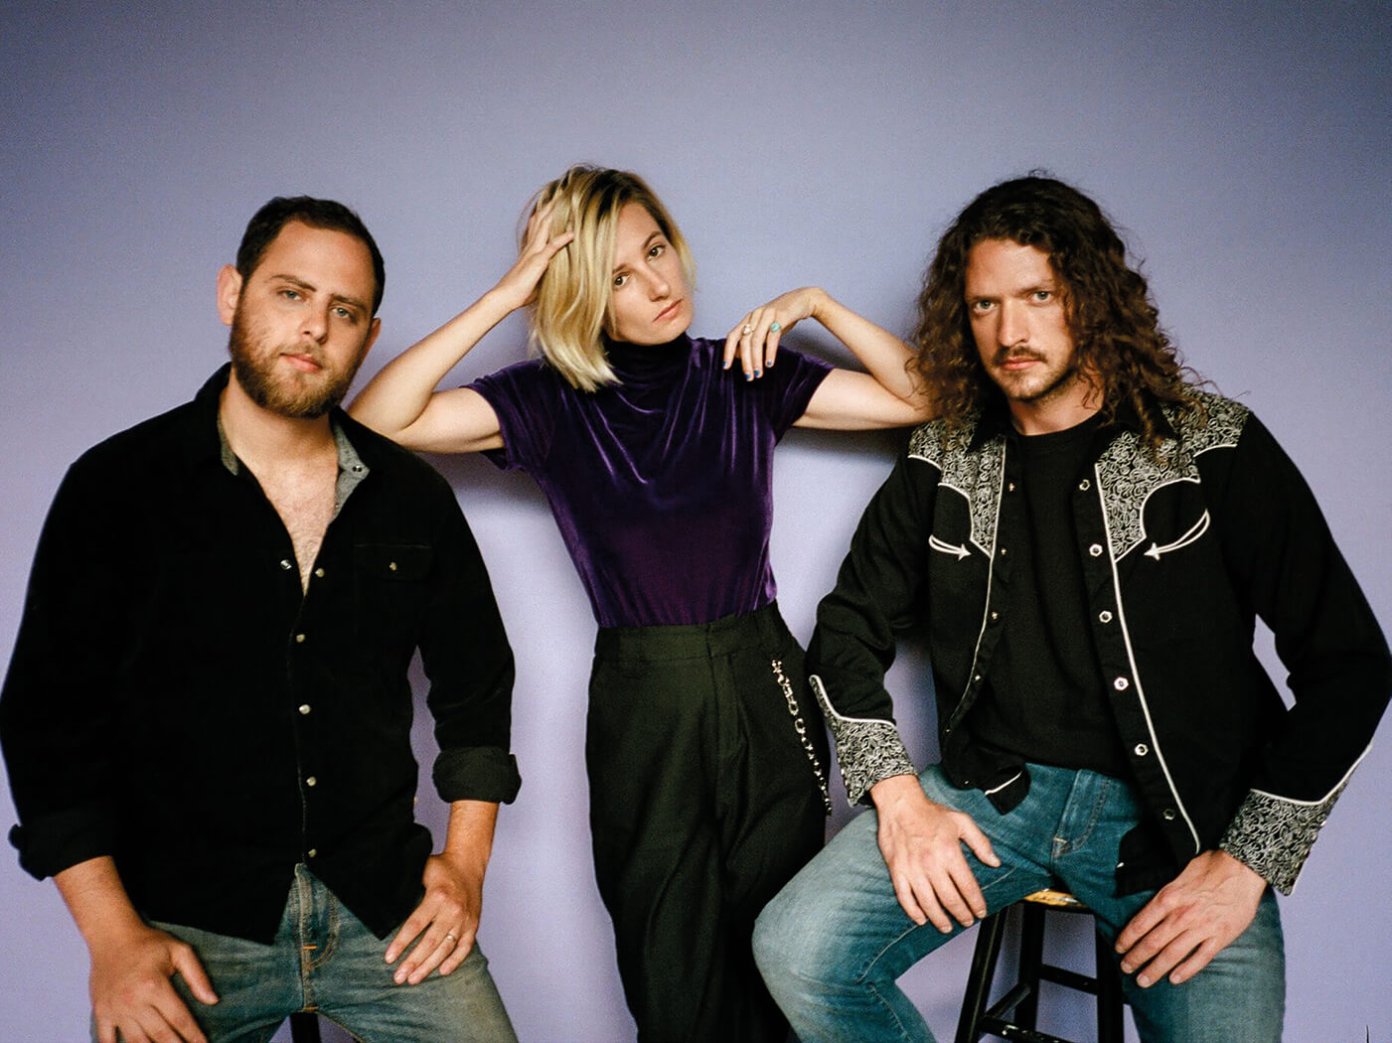 Interview: Leah Wellbaum of Slothrust